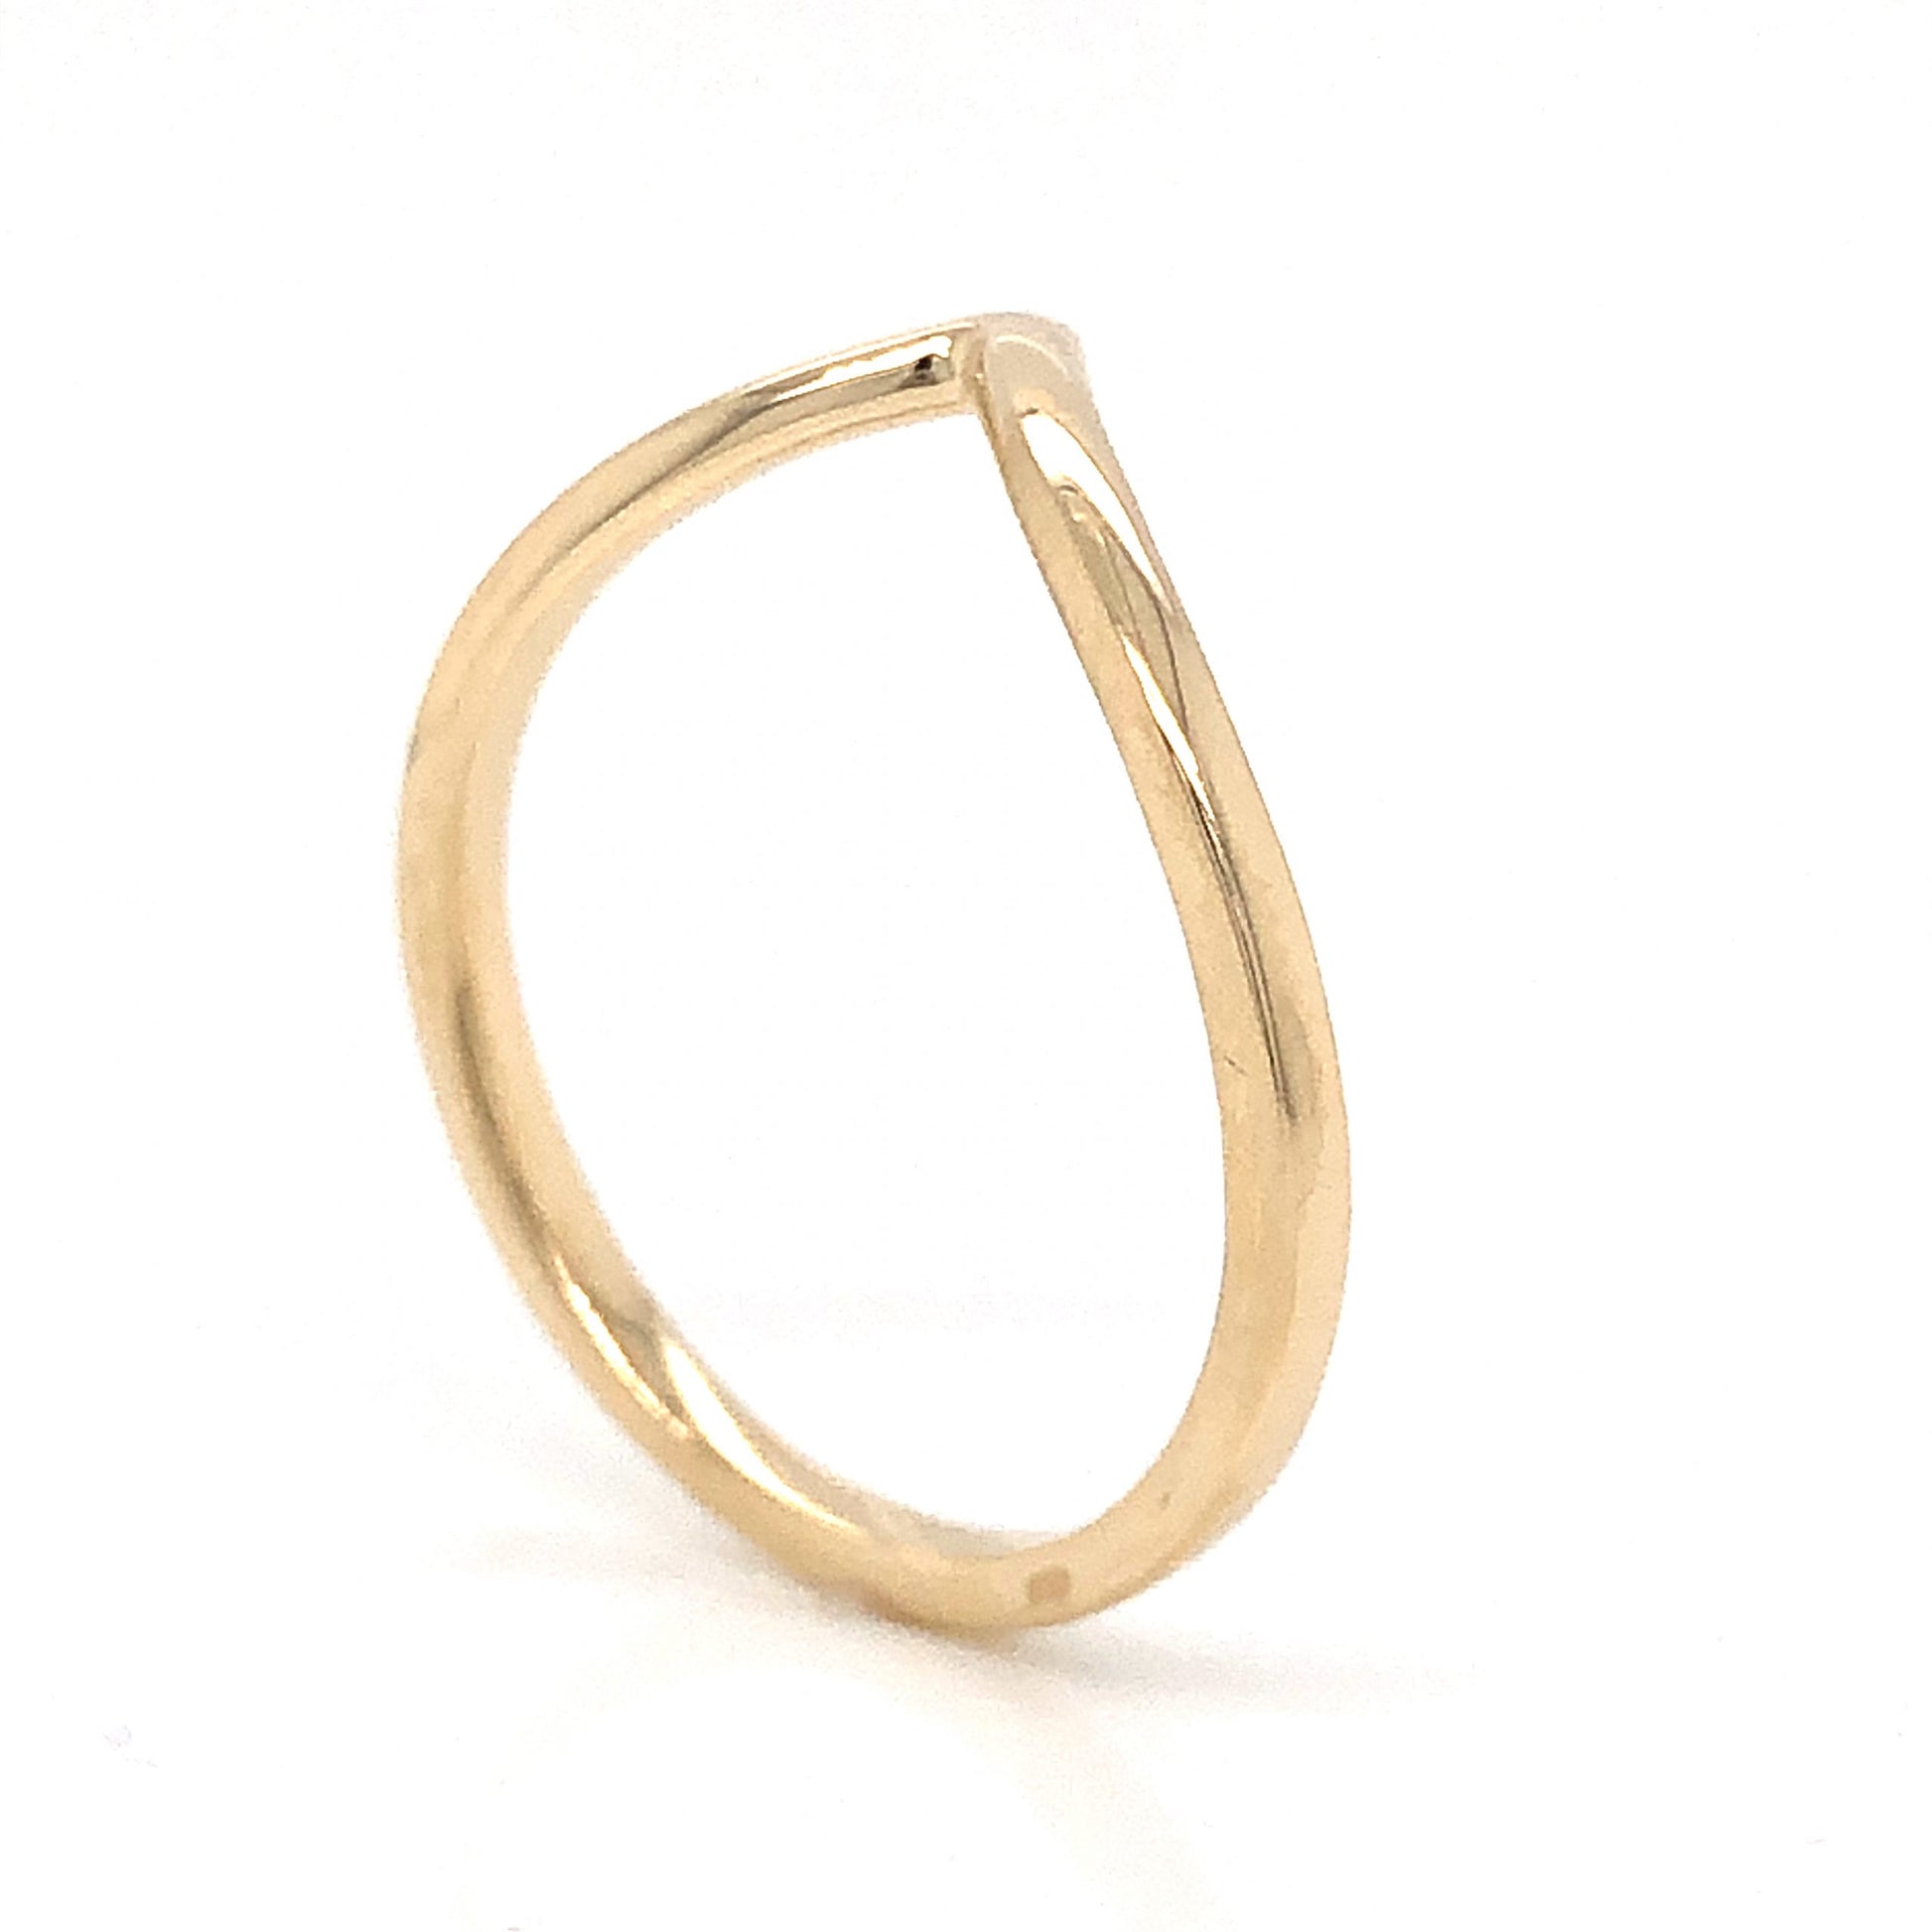 Thin Contoured Wedding Band in 14k Yellow GoldComposition: 14 Karat Yellow GoldRing Size: 7.5Total Gram Weight: 1.9 gInscription: 14k